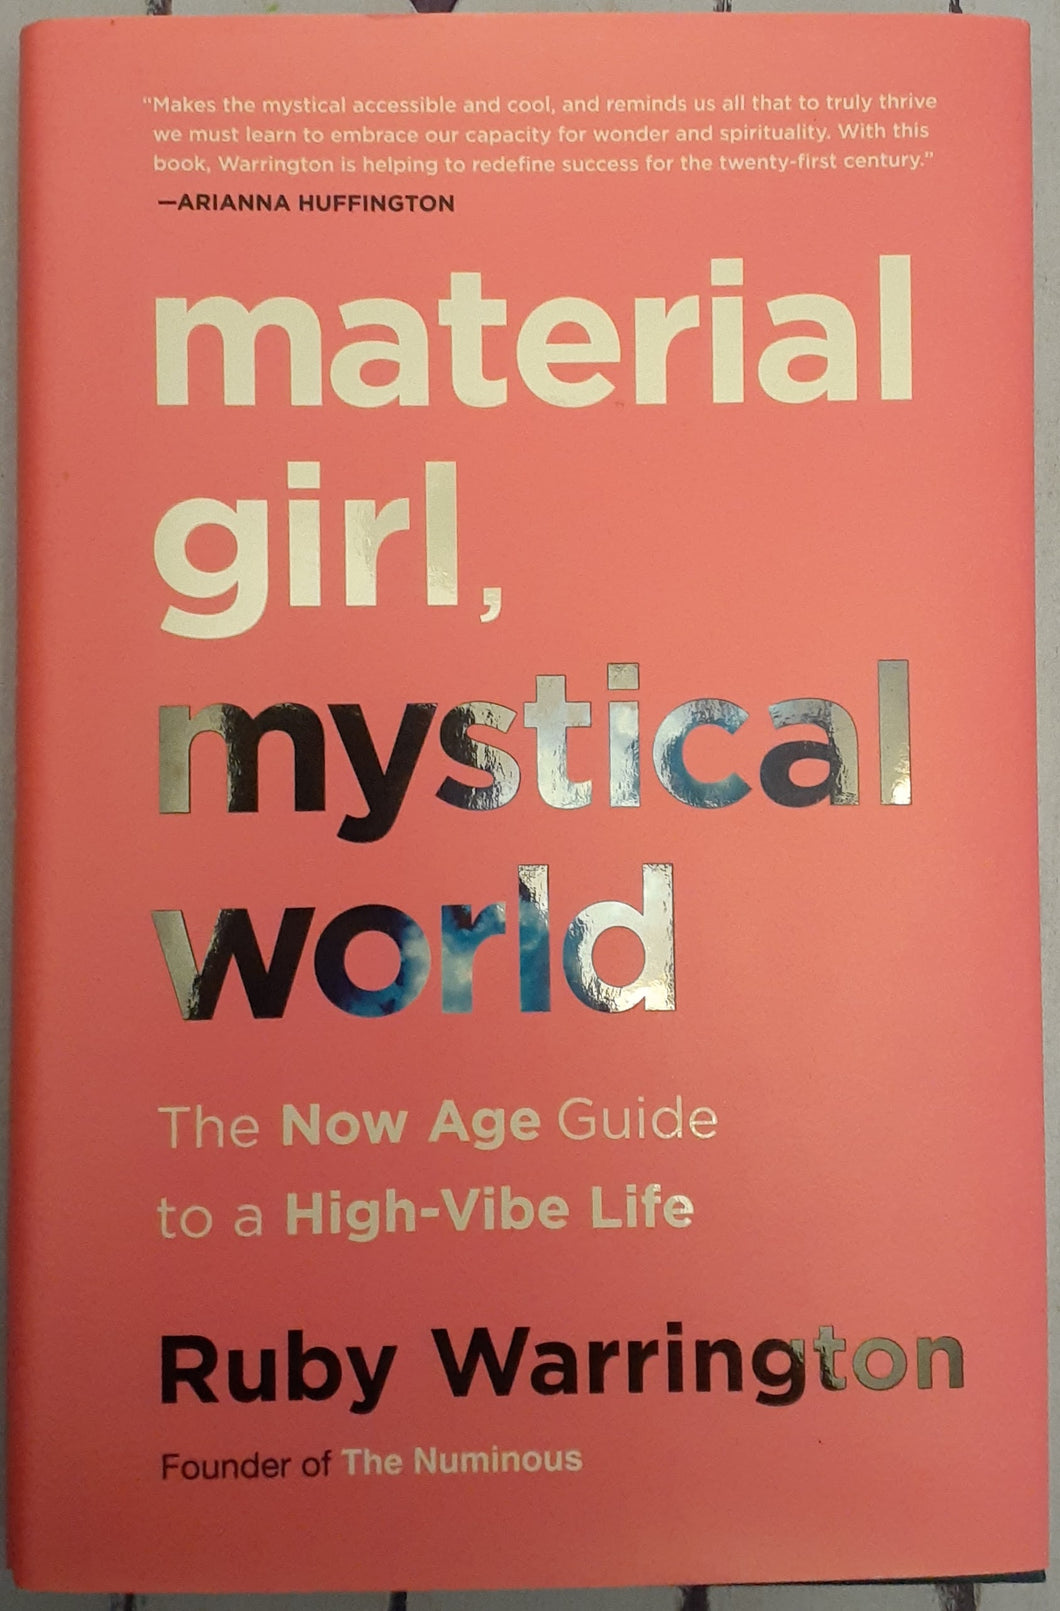 Material Girl, Mystical World - The Now Age Guide to a High-Vibe Life